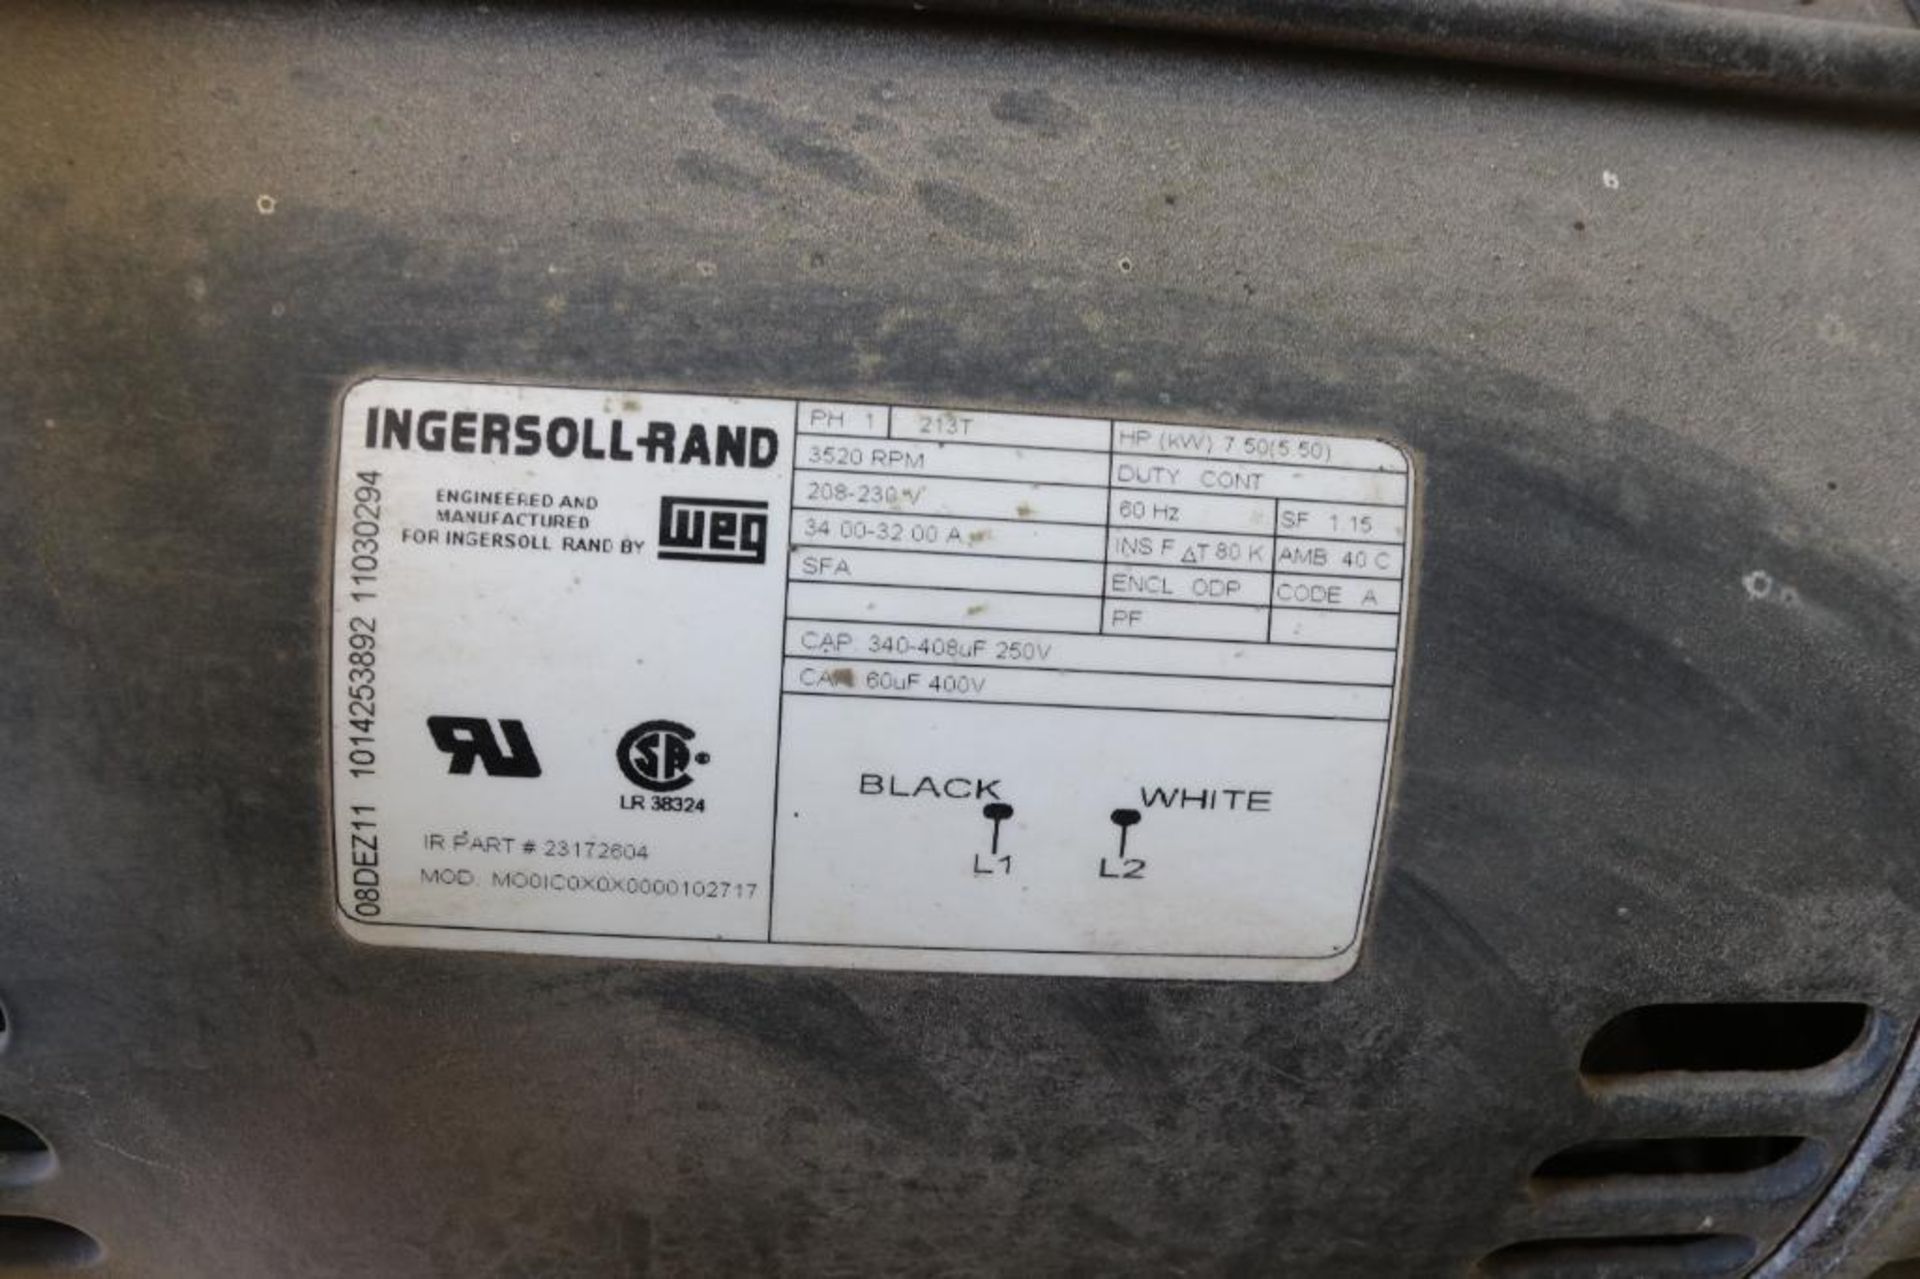 Ingersoll Rand Model 2475.5-P Two Stage Cast Iron Air Compressor Serial Number: CBV554476 230V 60Hz - Image 4 of 9